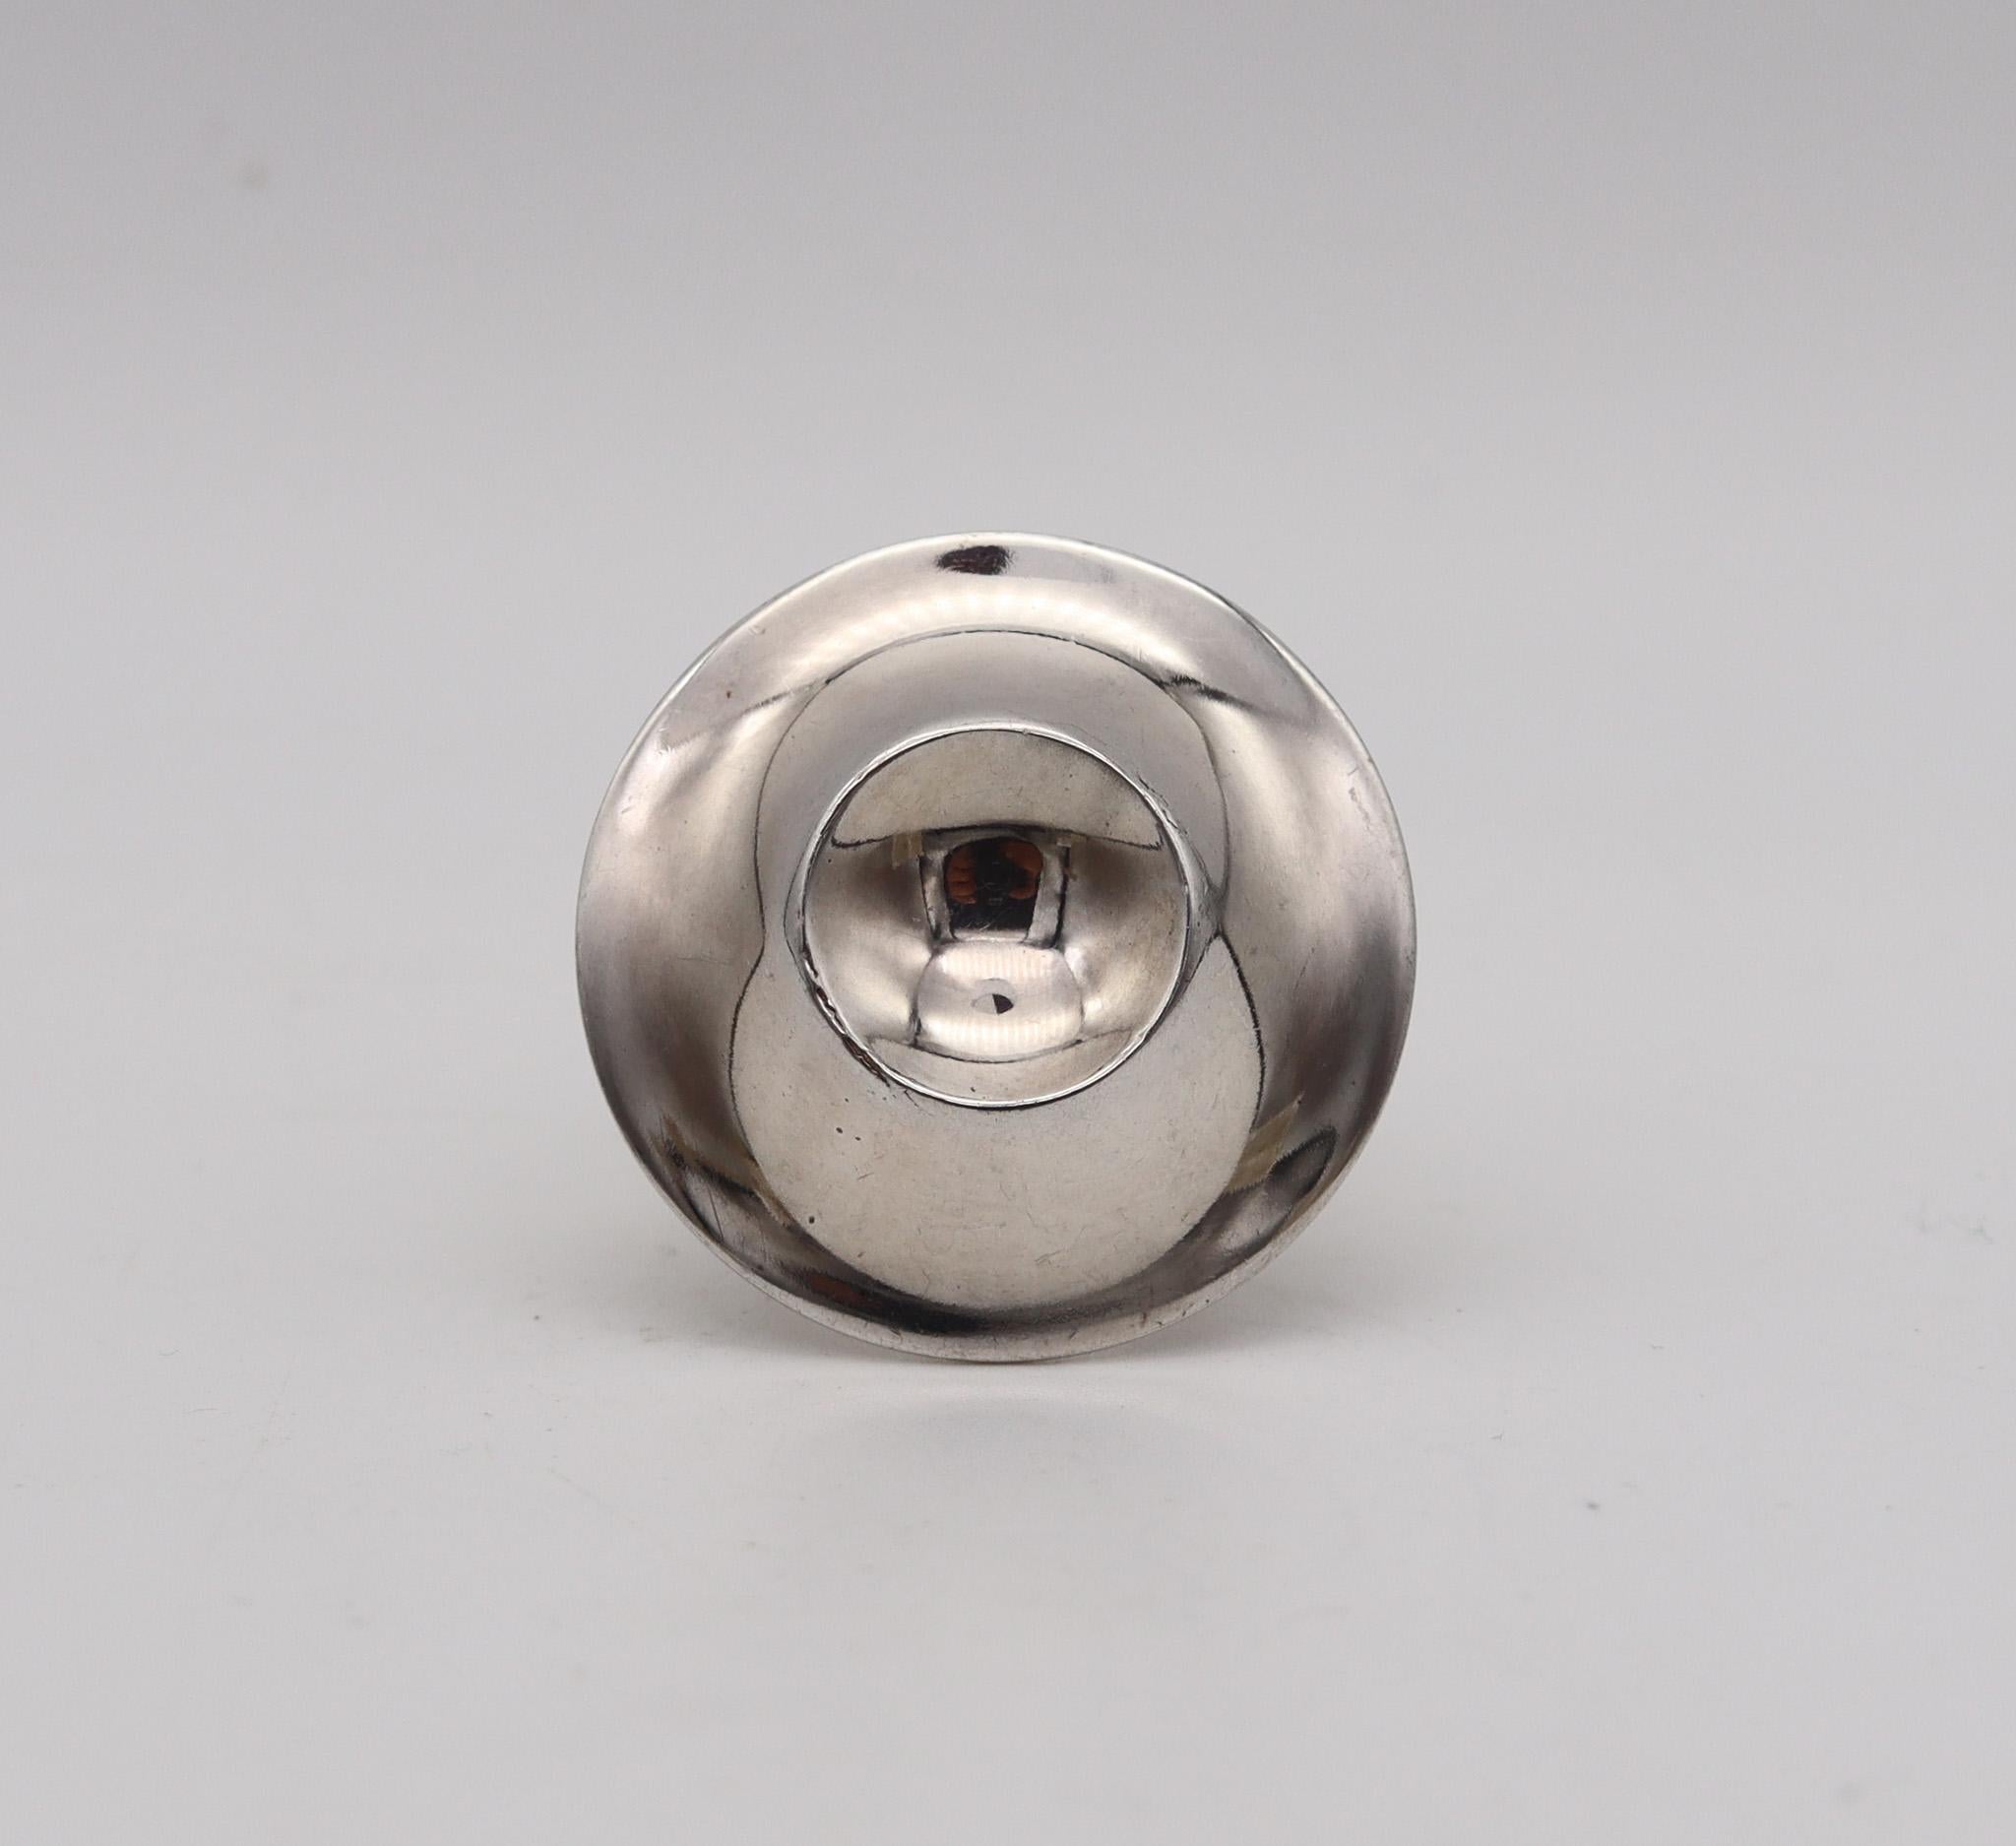 Modernist ring designed by Owe Johansson.

Fabulous modernist ring, created in Finland by the artist silversmith Owe Johansson, back in the 1970. This ring has been crafted as a large dome with an incuse circle in solid .925/.999 sterling. with high